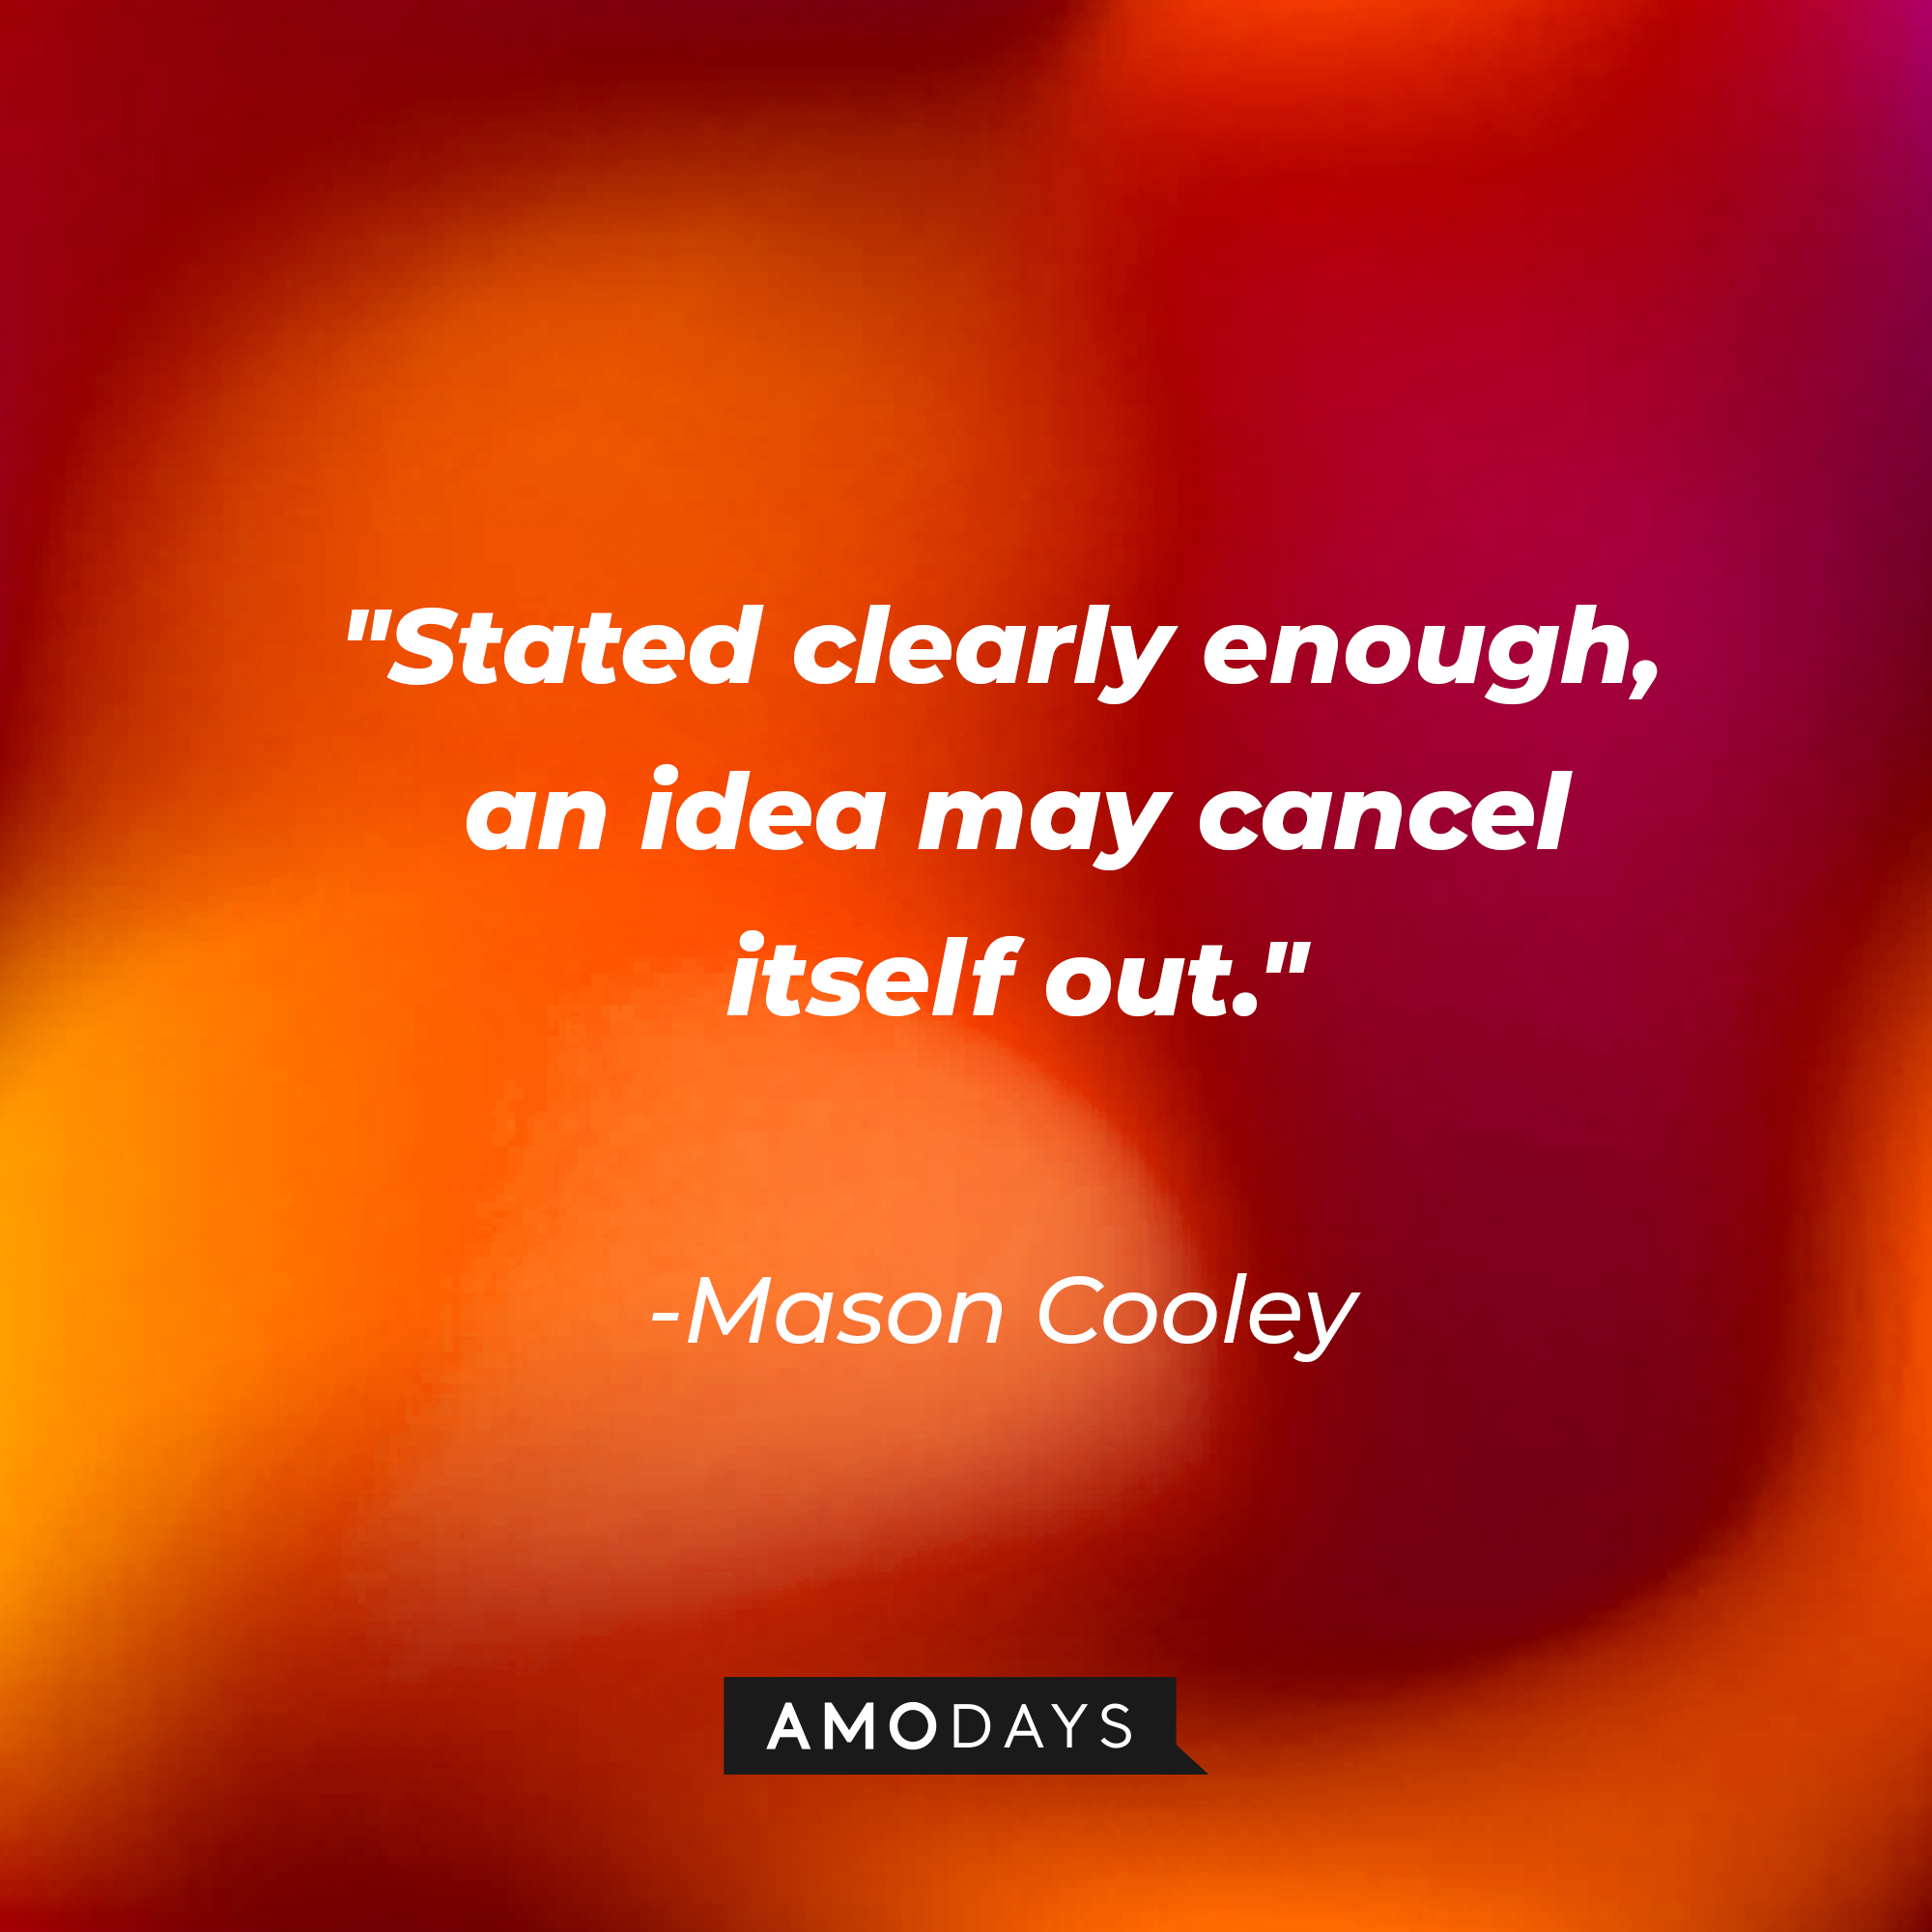 Mason Cooley's quote: "Stated clearly enough, an idea may cancel itself out." | Source: AmoDays